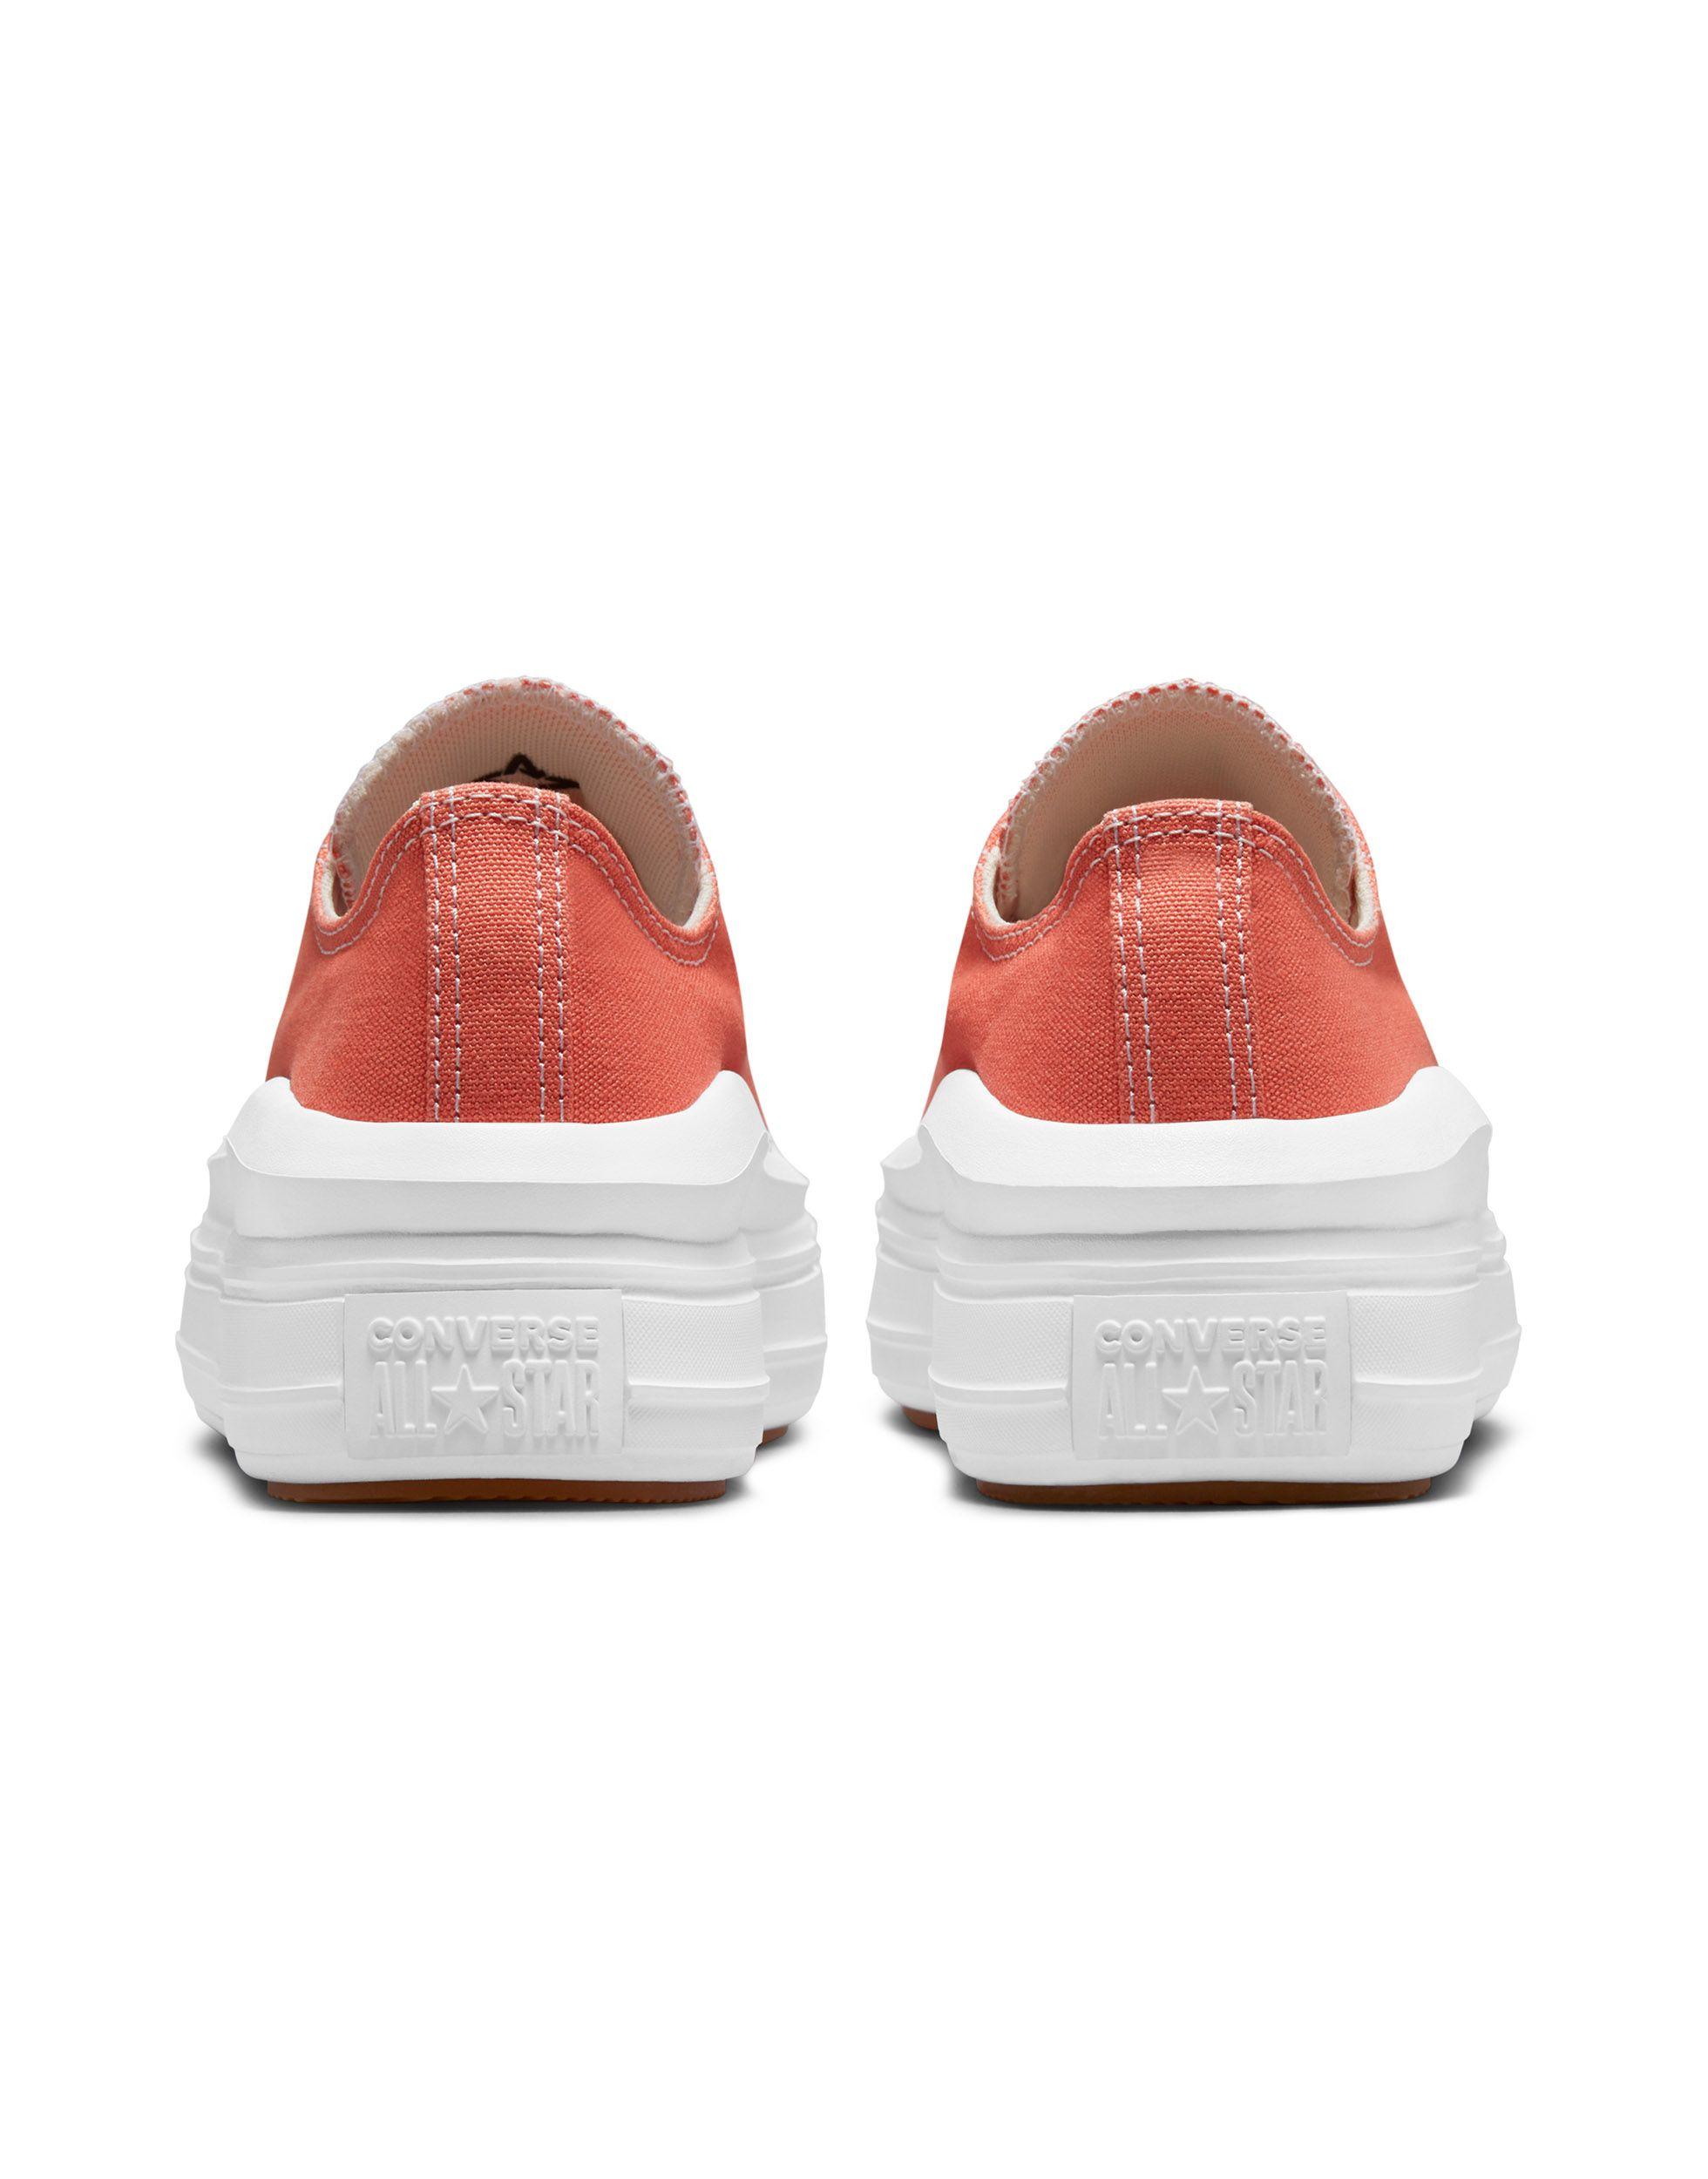 Converse Chuck Taylor All Star Ox Move Canvas Platform Sneakers in Orange |  Lyst